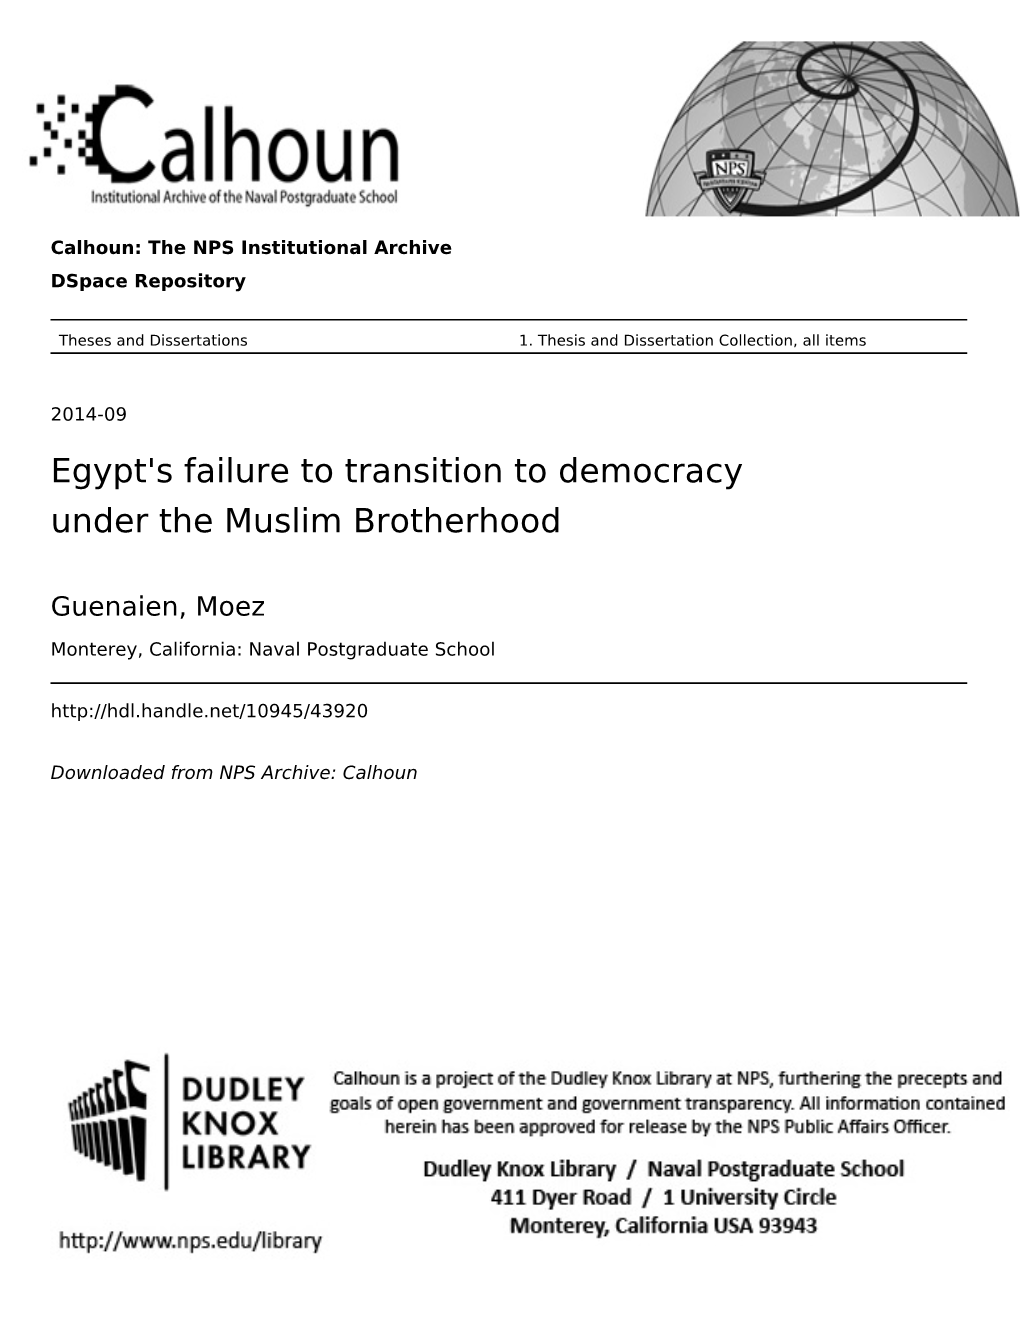 Egypt's Failure to Transition to Democracy Under the Muslim Brotherhood